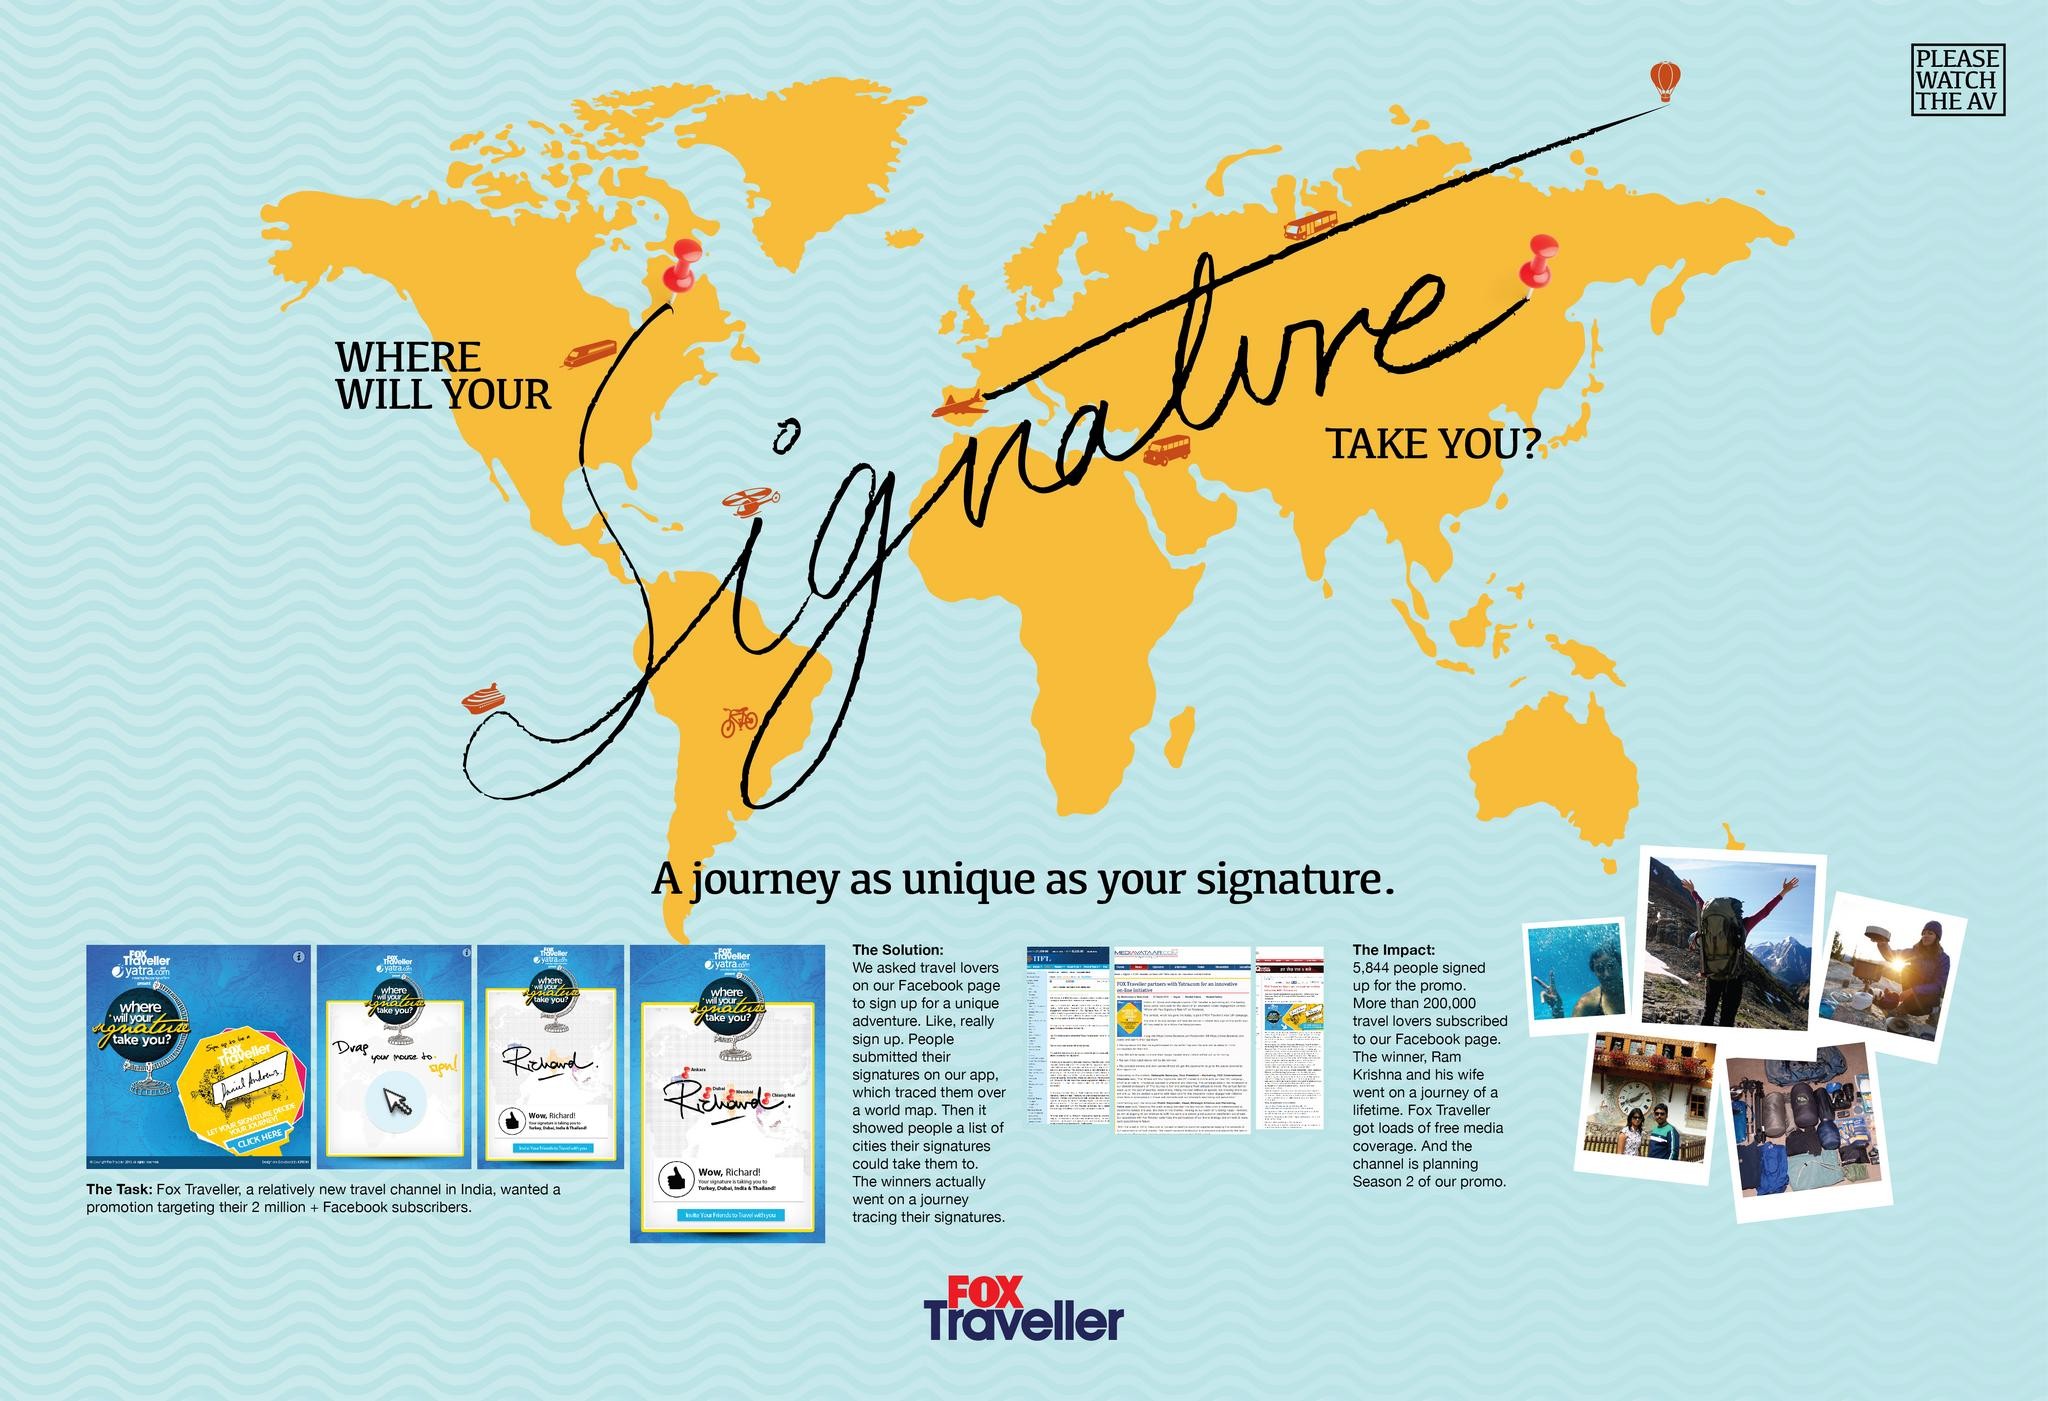 WHERE WILL YOUR SIGNATURE TAKE YOU?